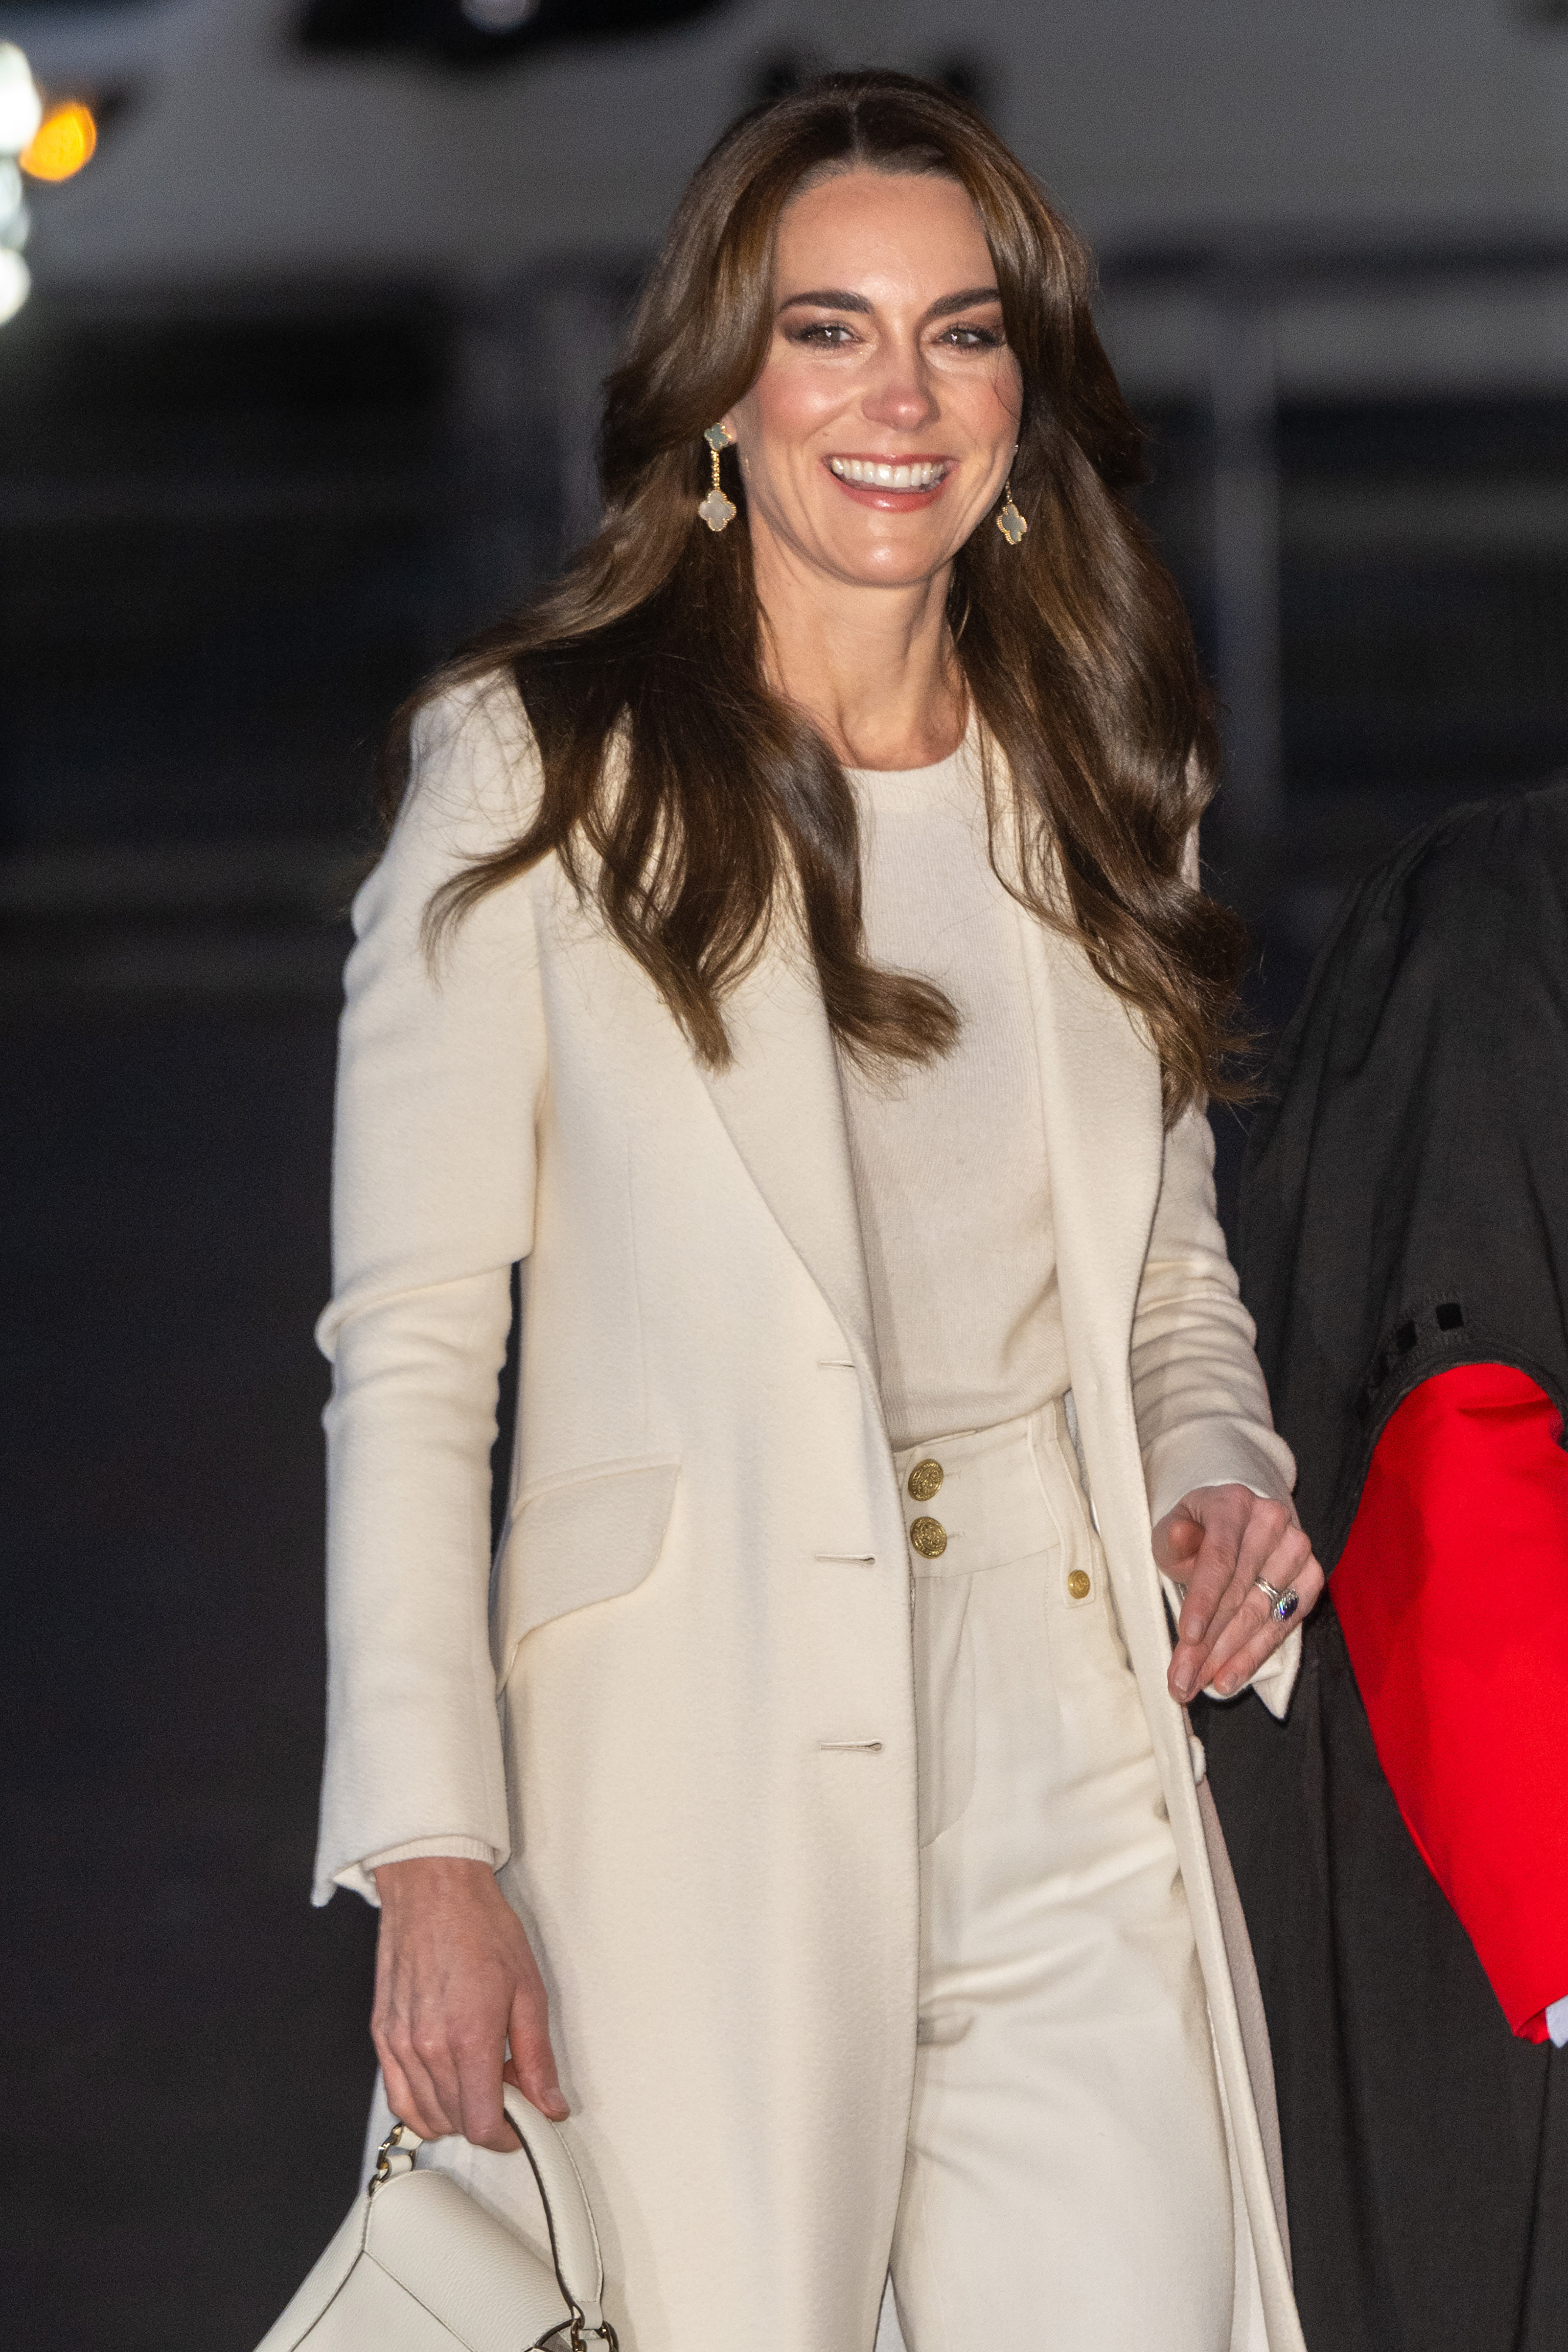 Kate Middleton smiling in an elegant white coat and holding a clutch